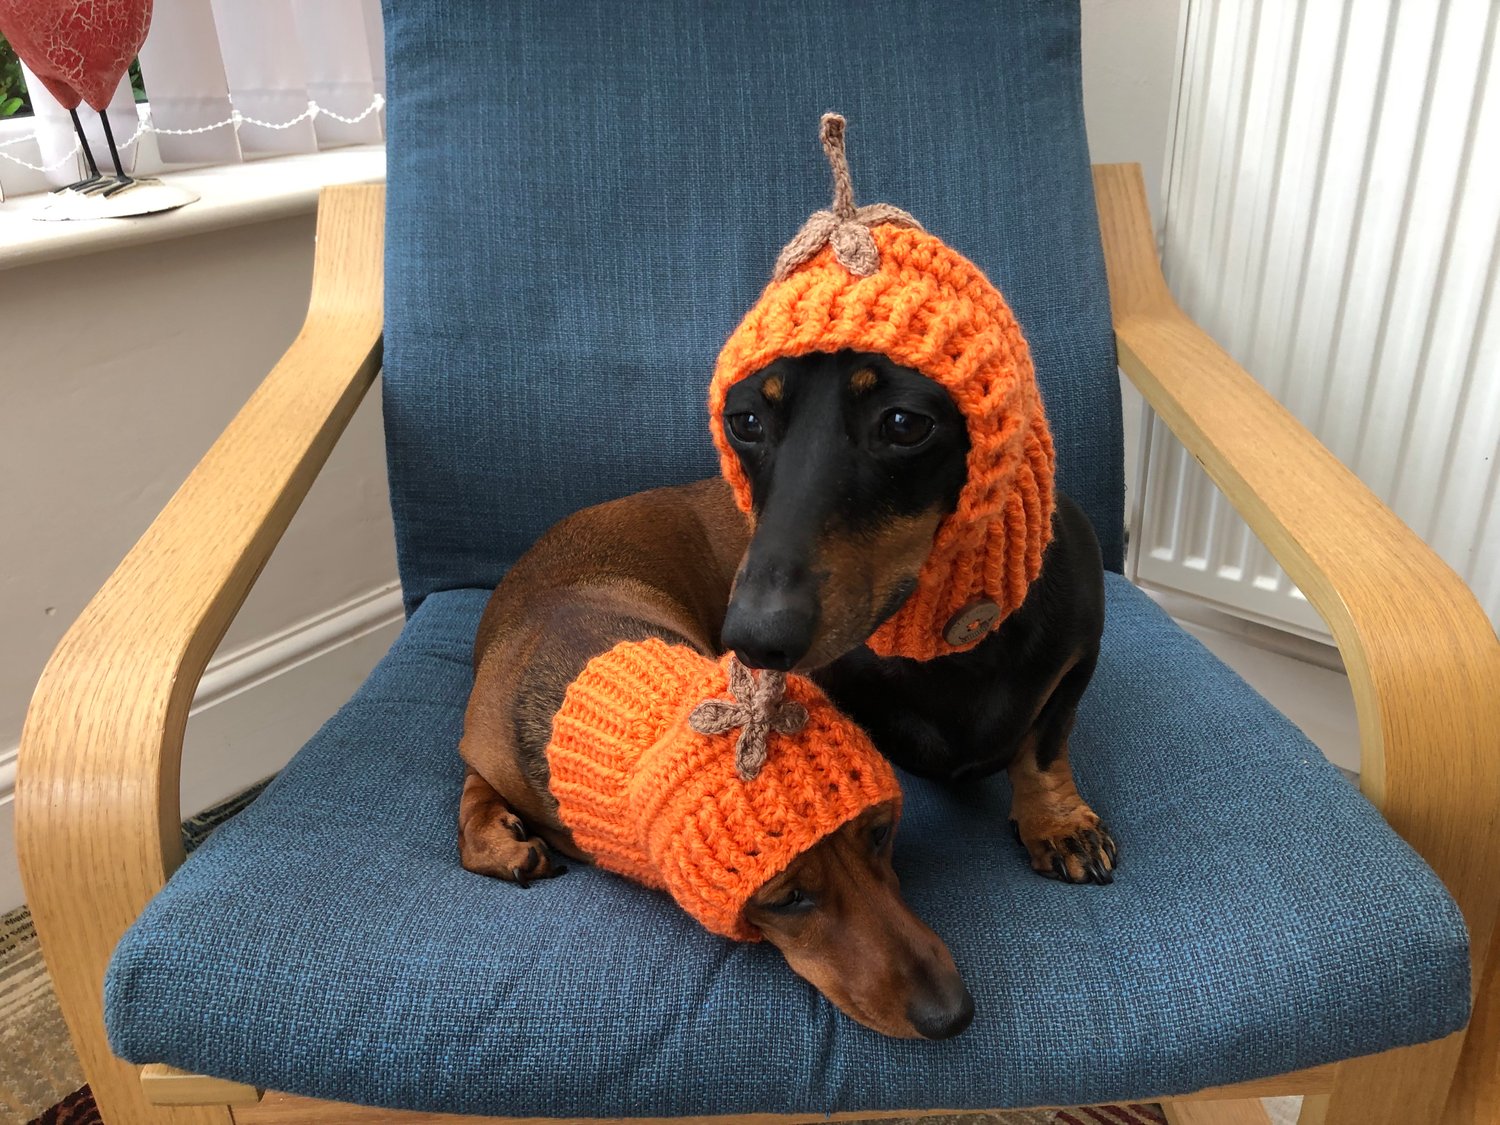 Image of Snazzy Pumpkin Snood